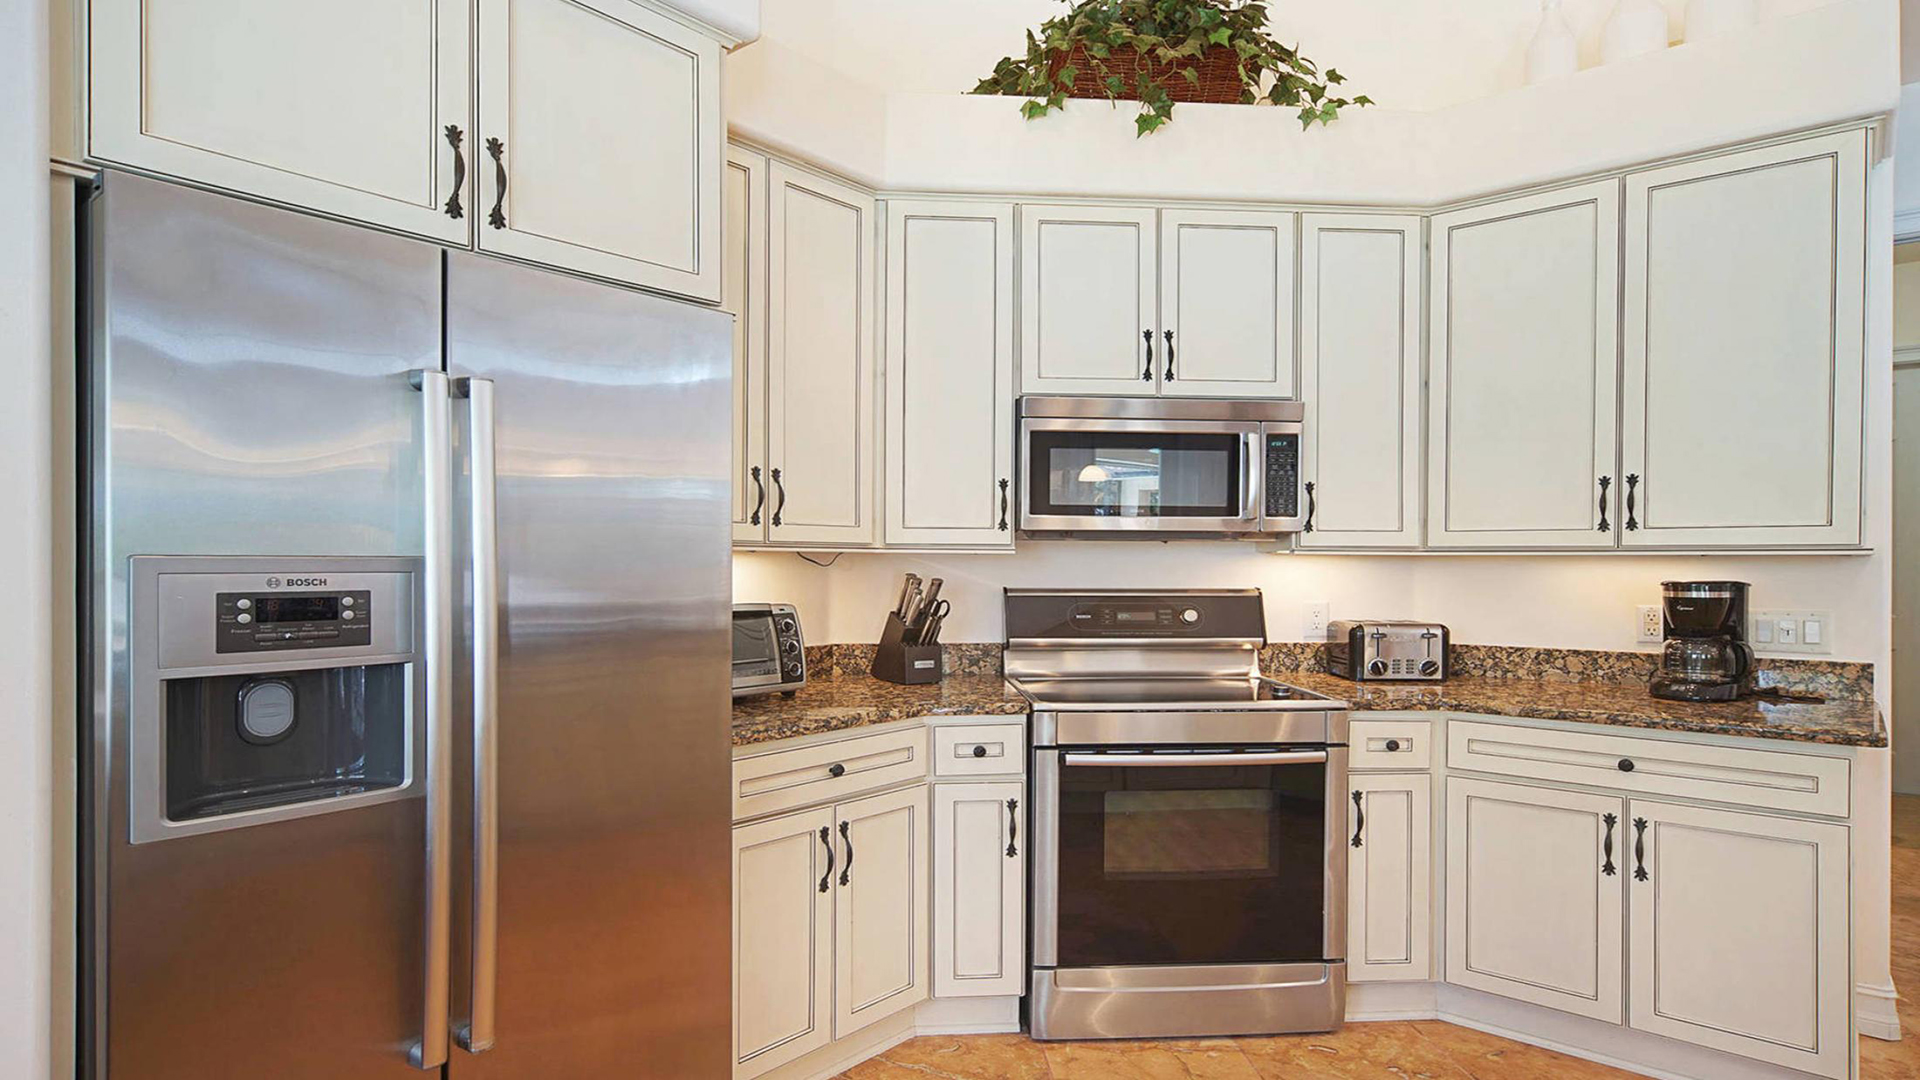 Stainless steel appliances add an upscale accent